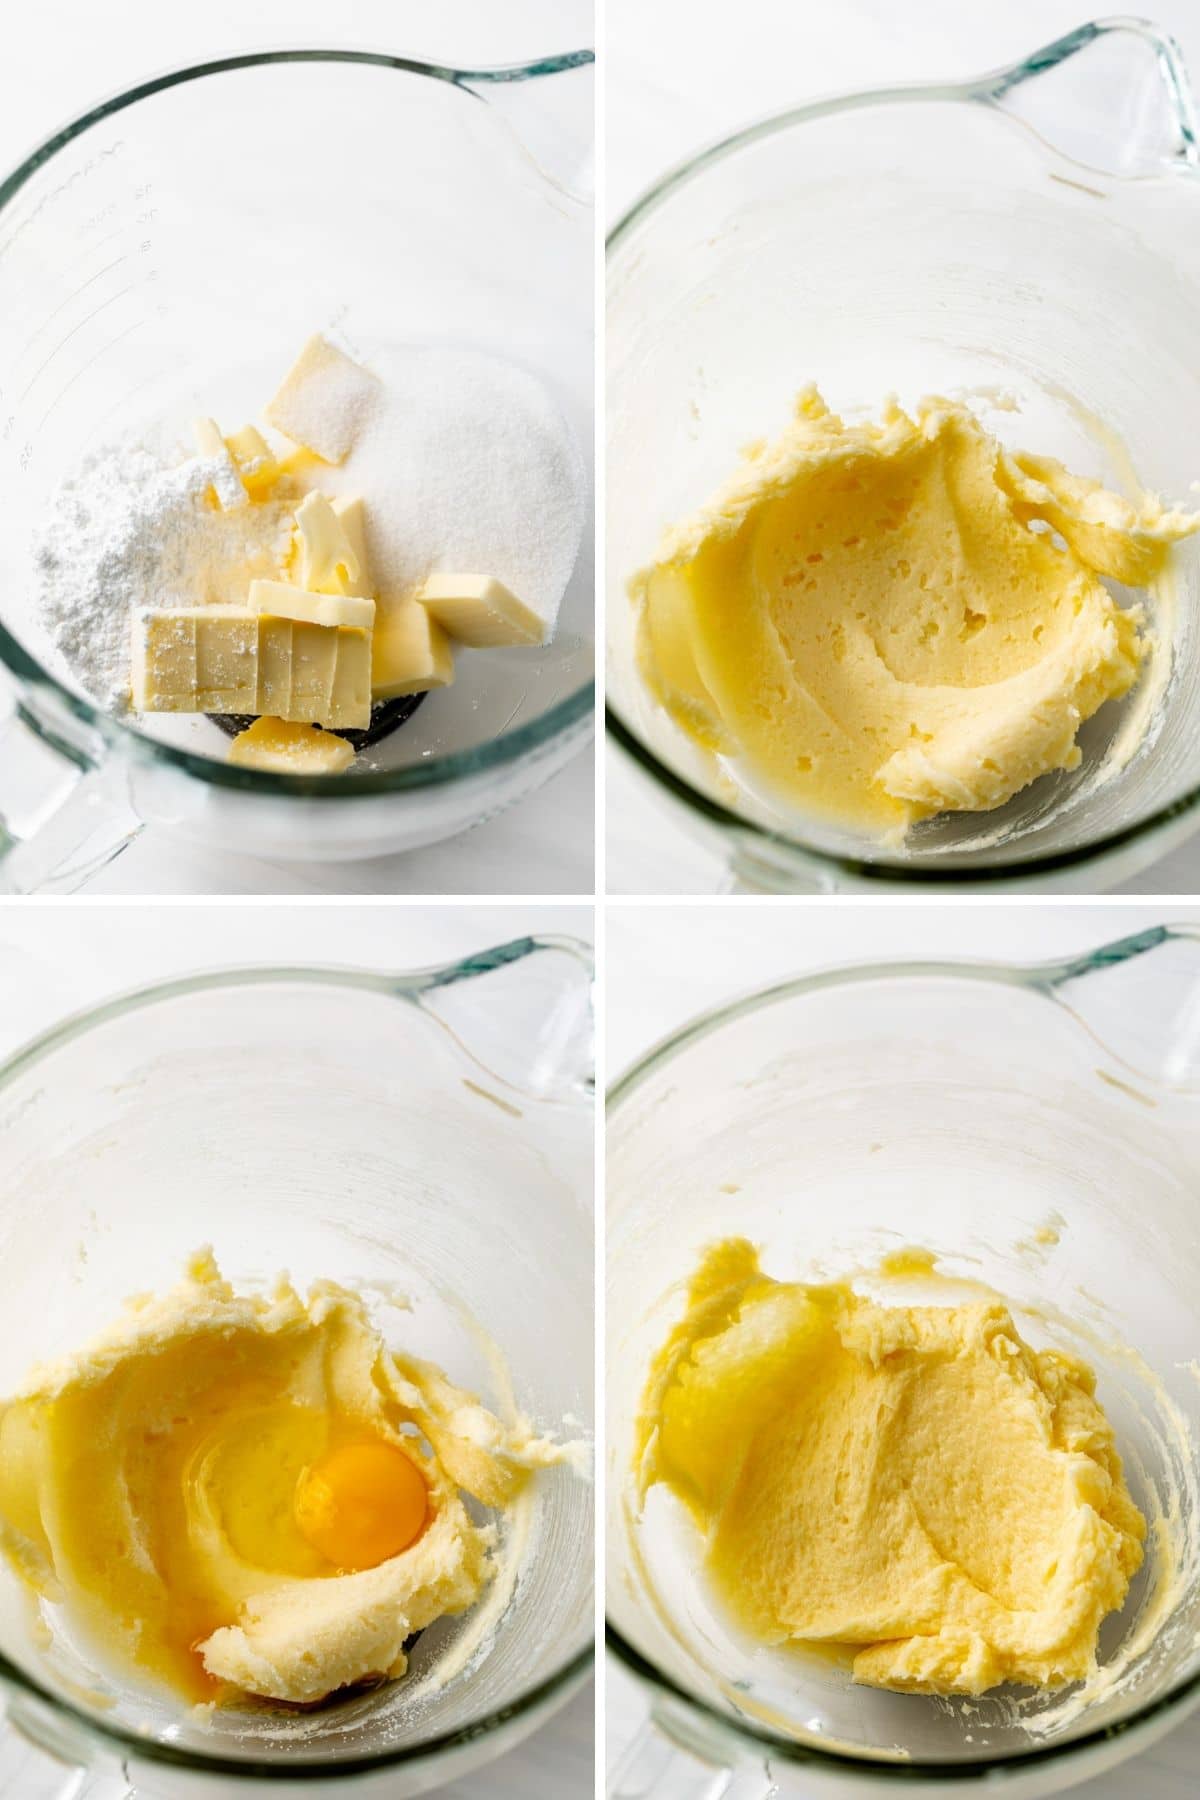 process shots showing butter, sugar, egg, and vanilla being mixed together